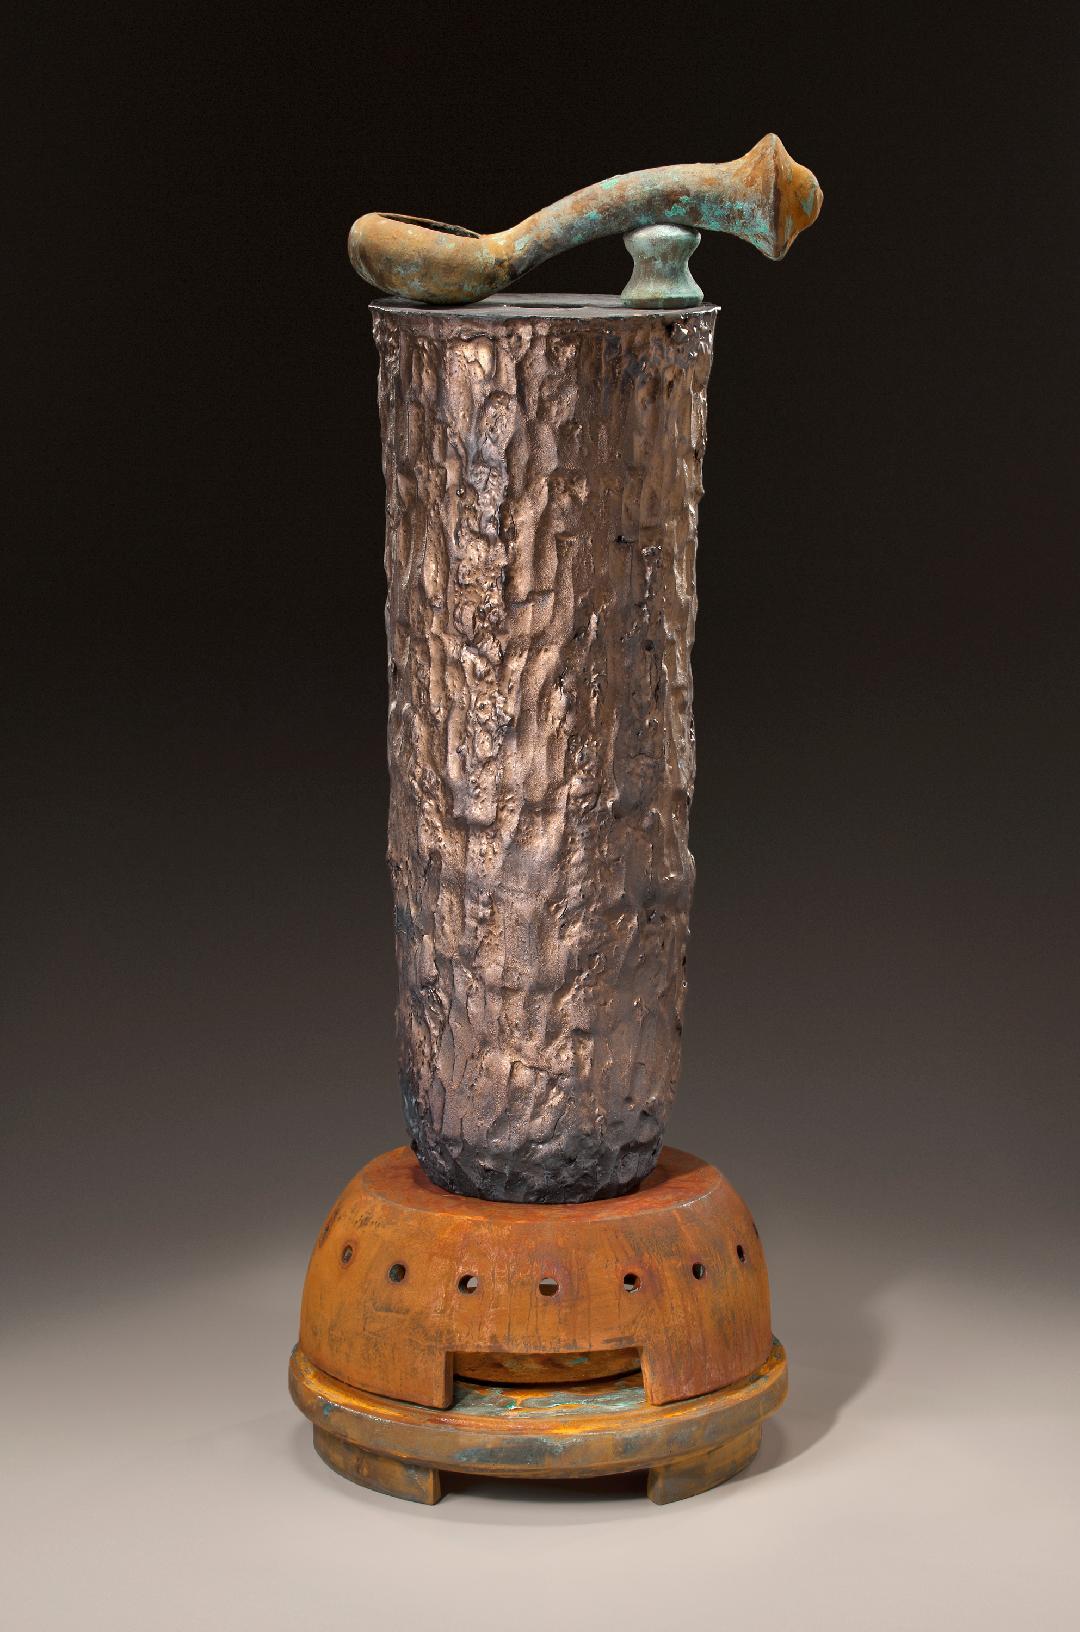 Richard Hirsch Glazed Ceramic Crucible Sculpture #24, 2011 In Excellent Condition For Sale In New York, NY